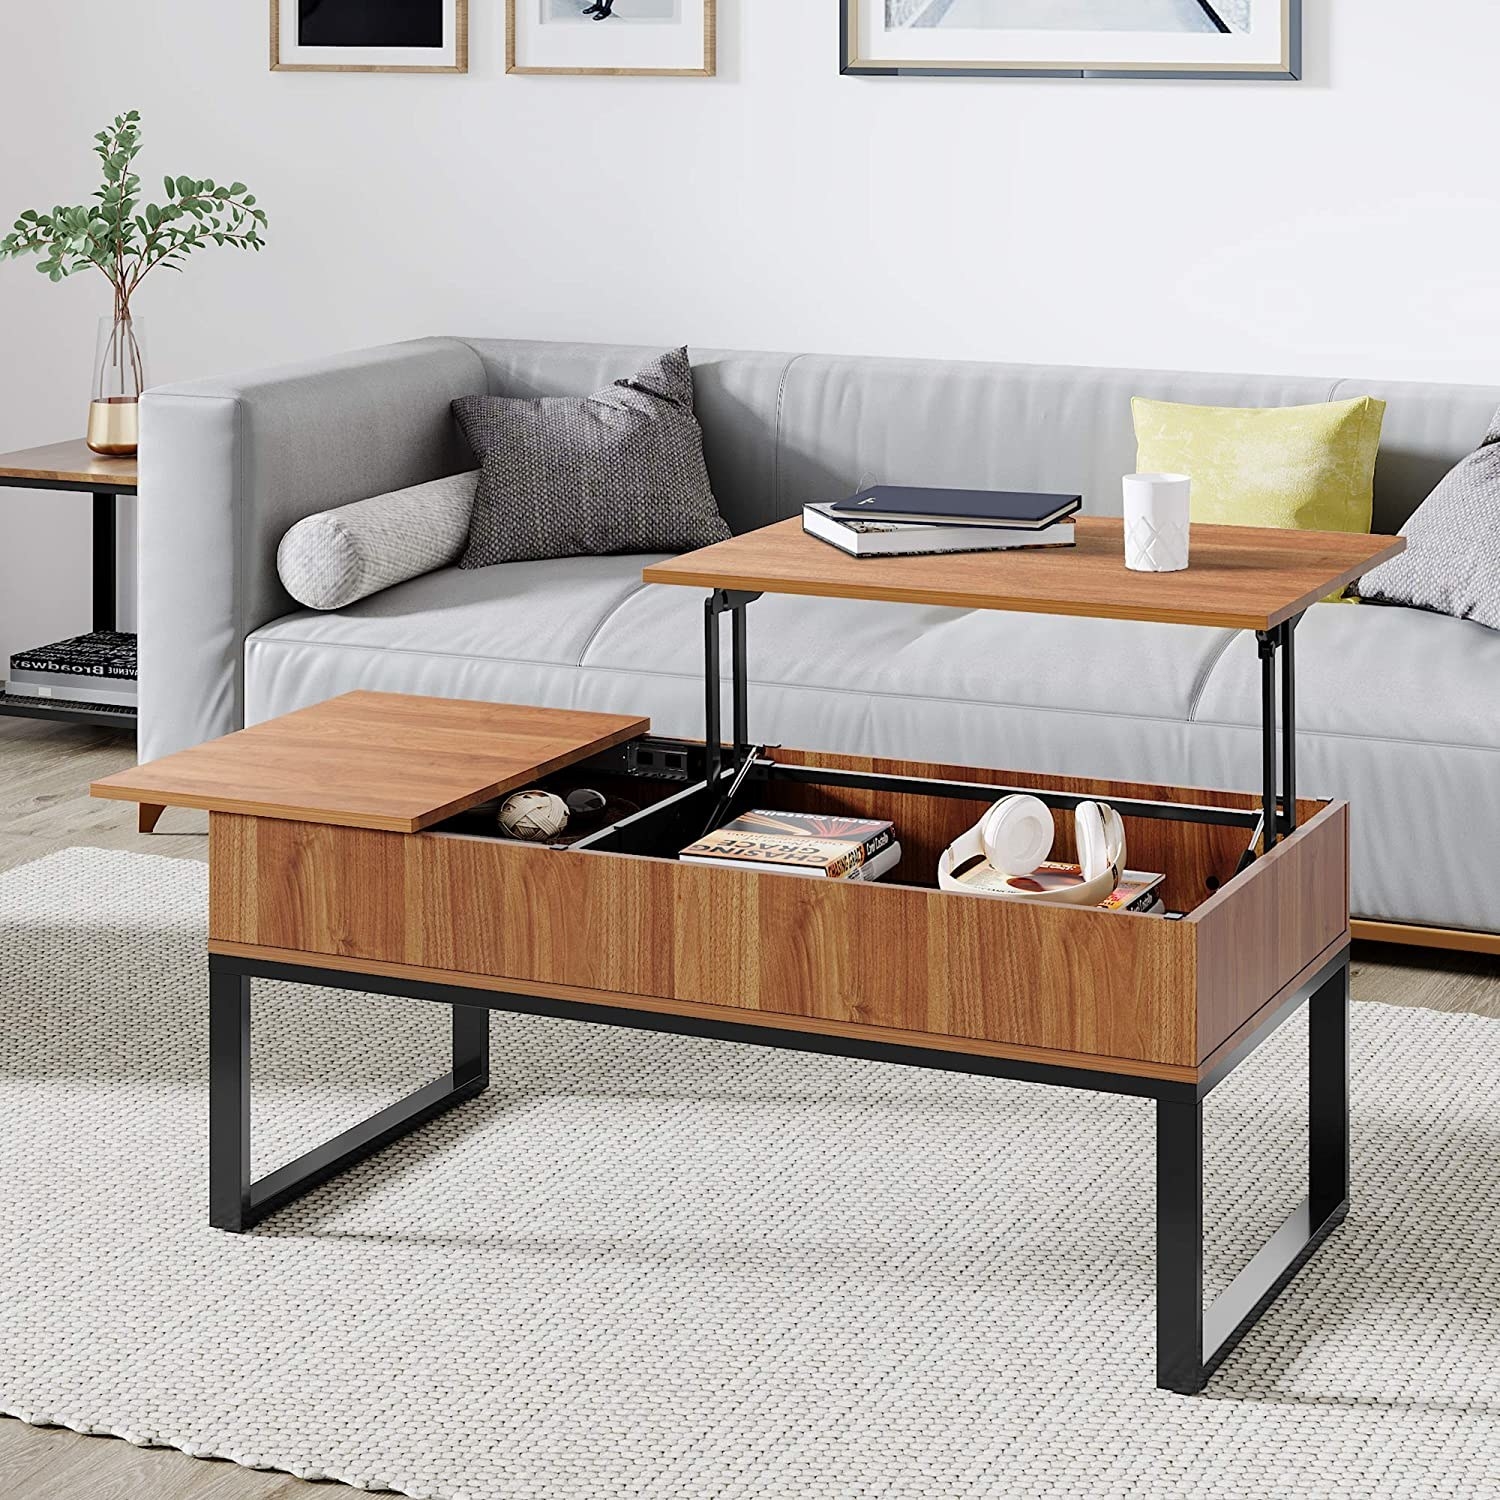 the coffee table with the exposed hidden compartment open and holding books and media items